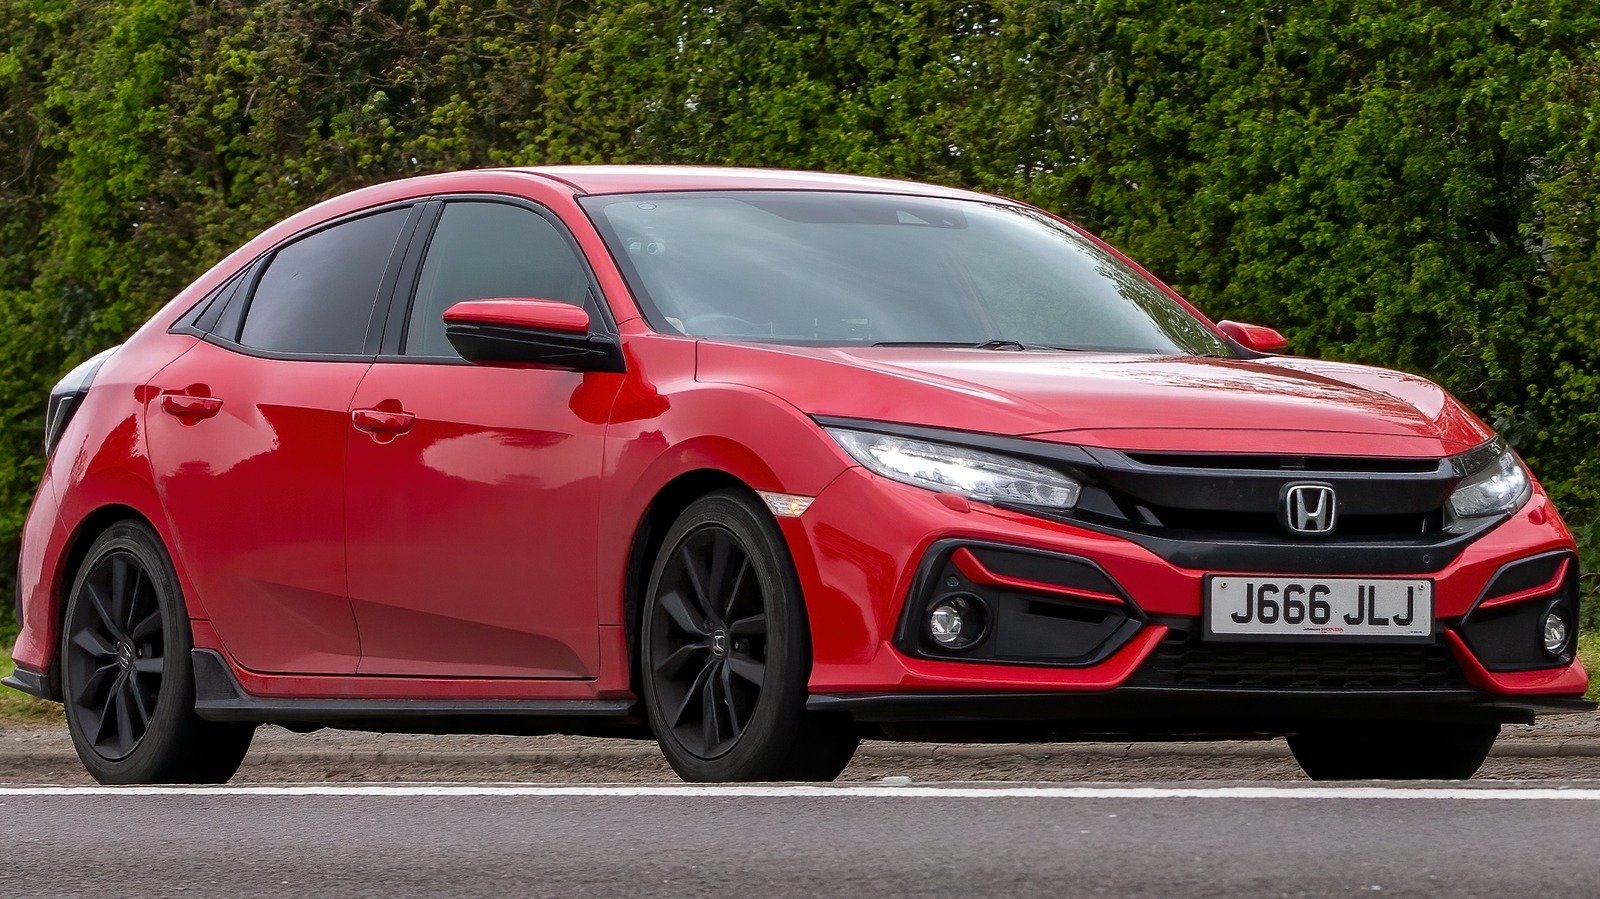 Honda Civic: The Best Years To Buy (And The Ones You Should Steer Clear Of)